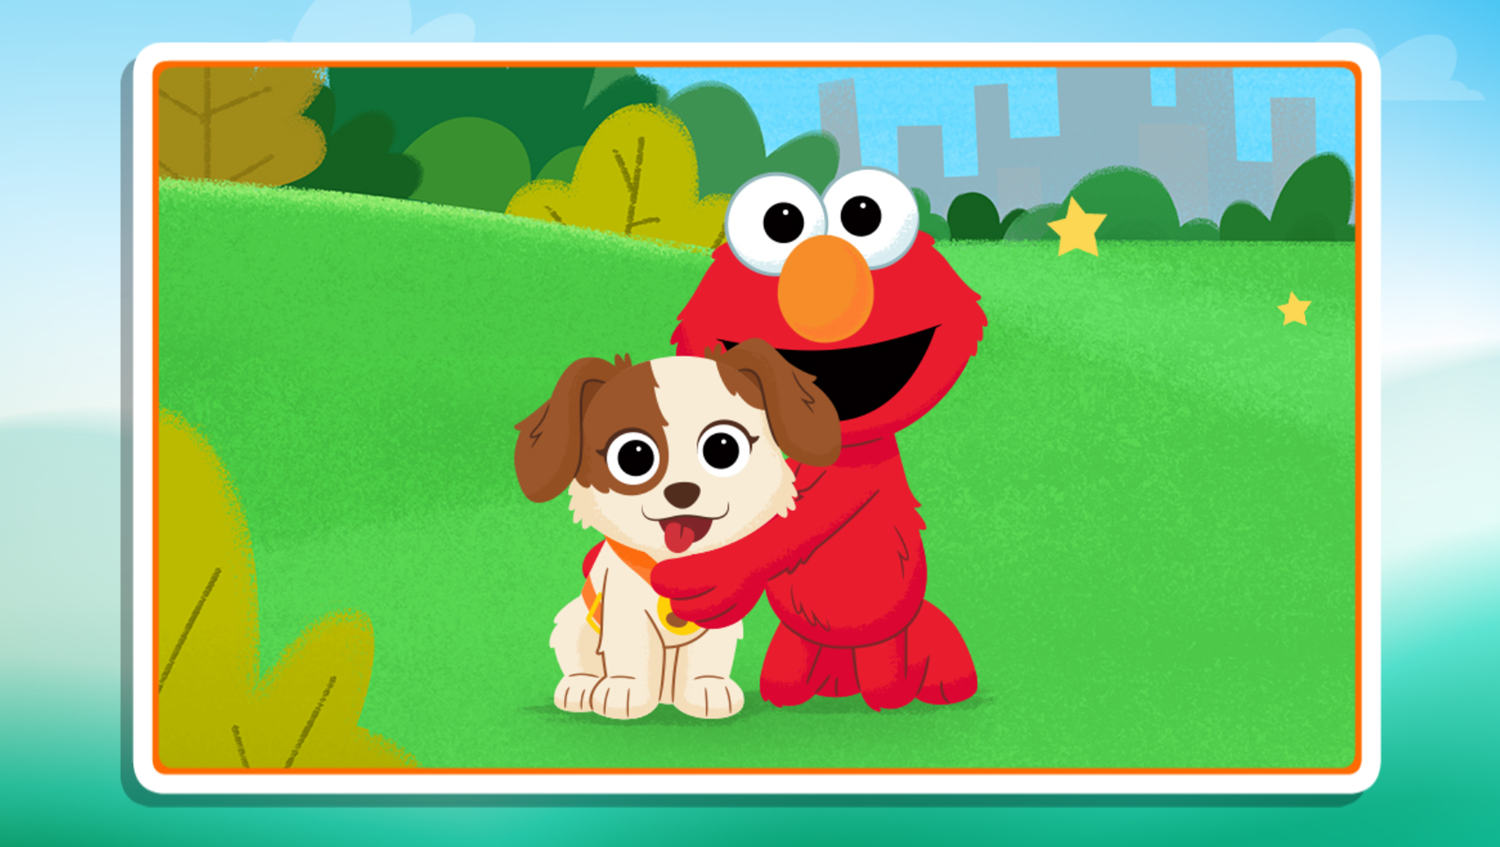 Sesame Street Furry Friends Forever Connect the Dots Game Level Animation Screenshot.